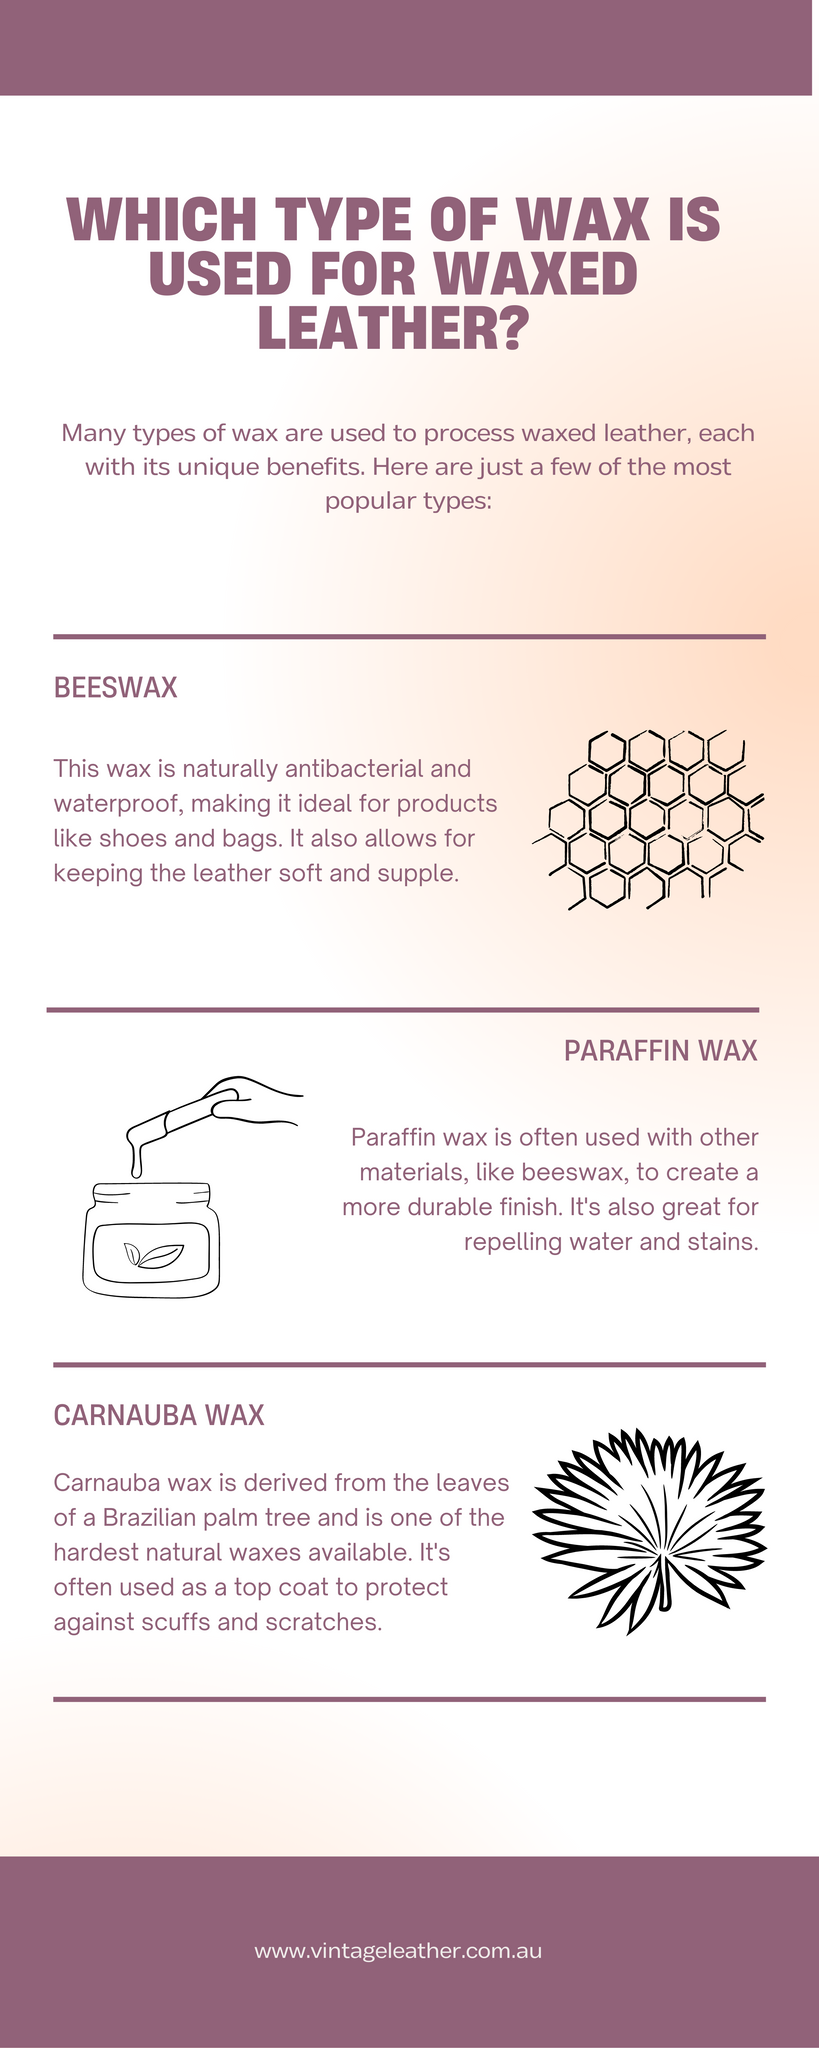 Which type of wax is used for Waxed leather?